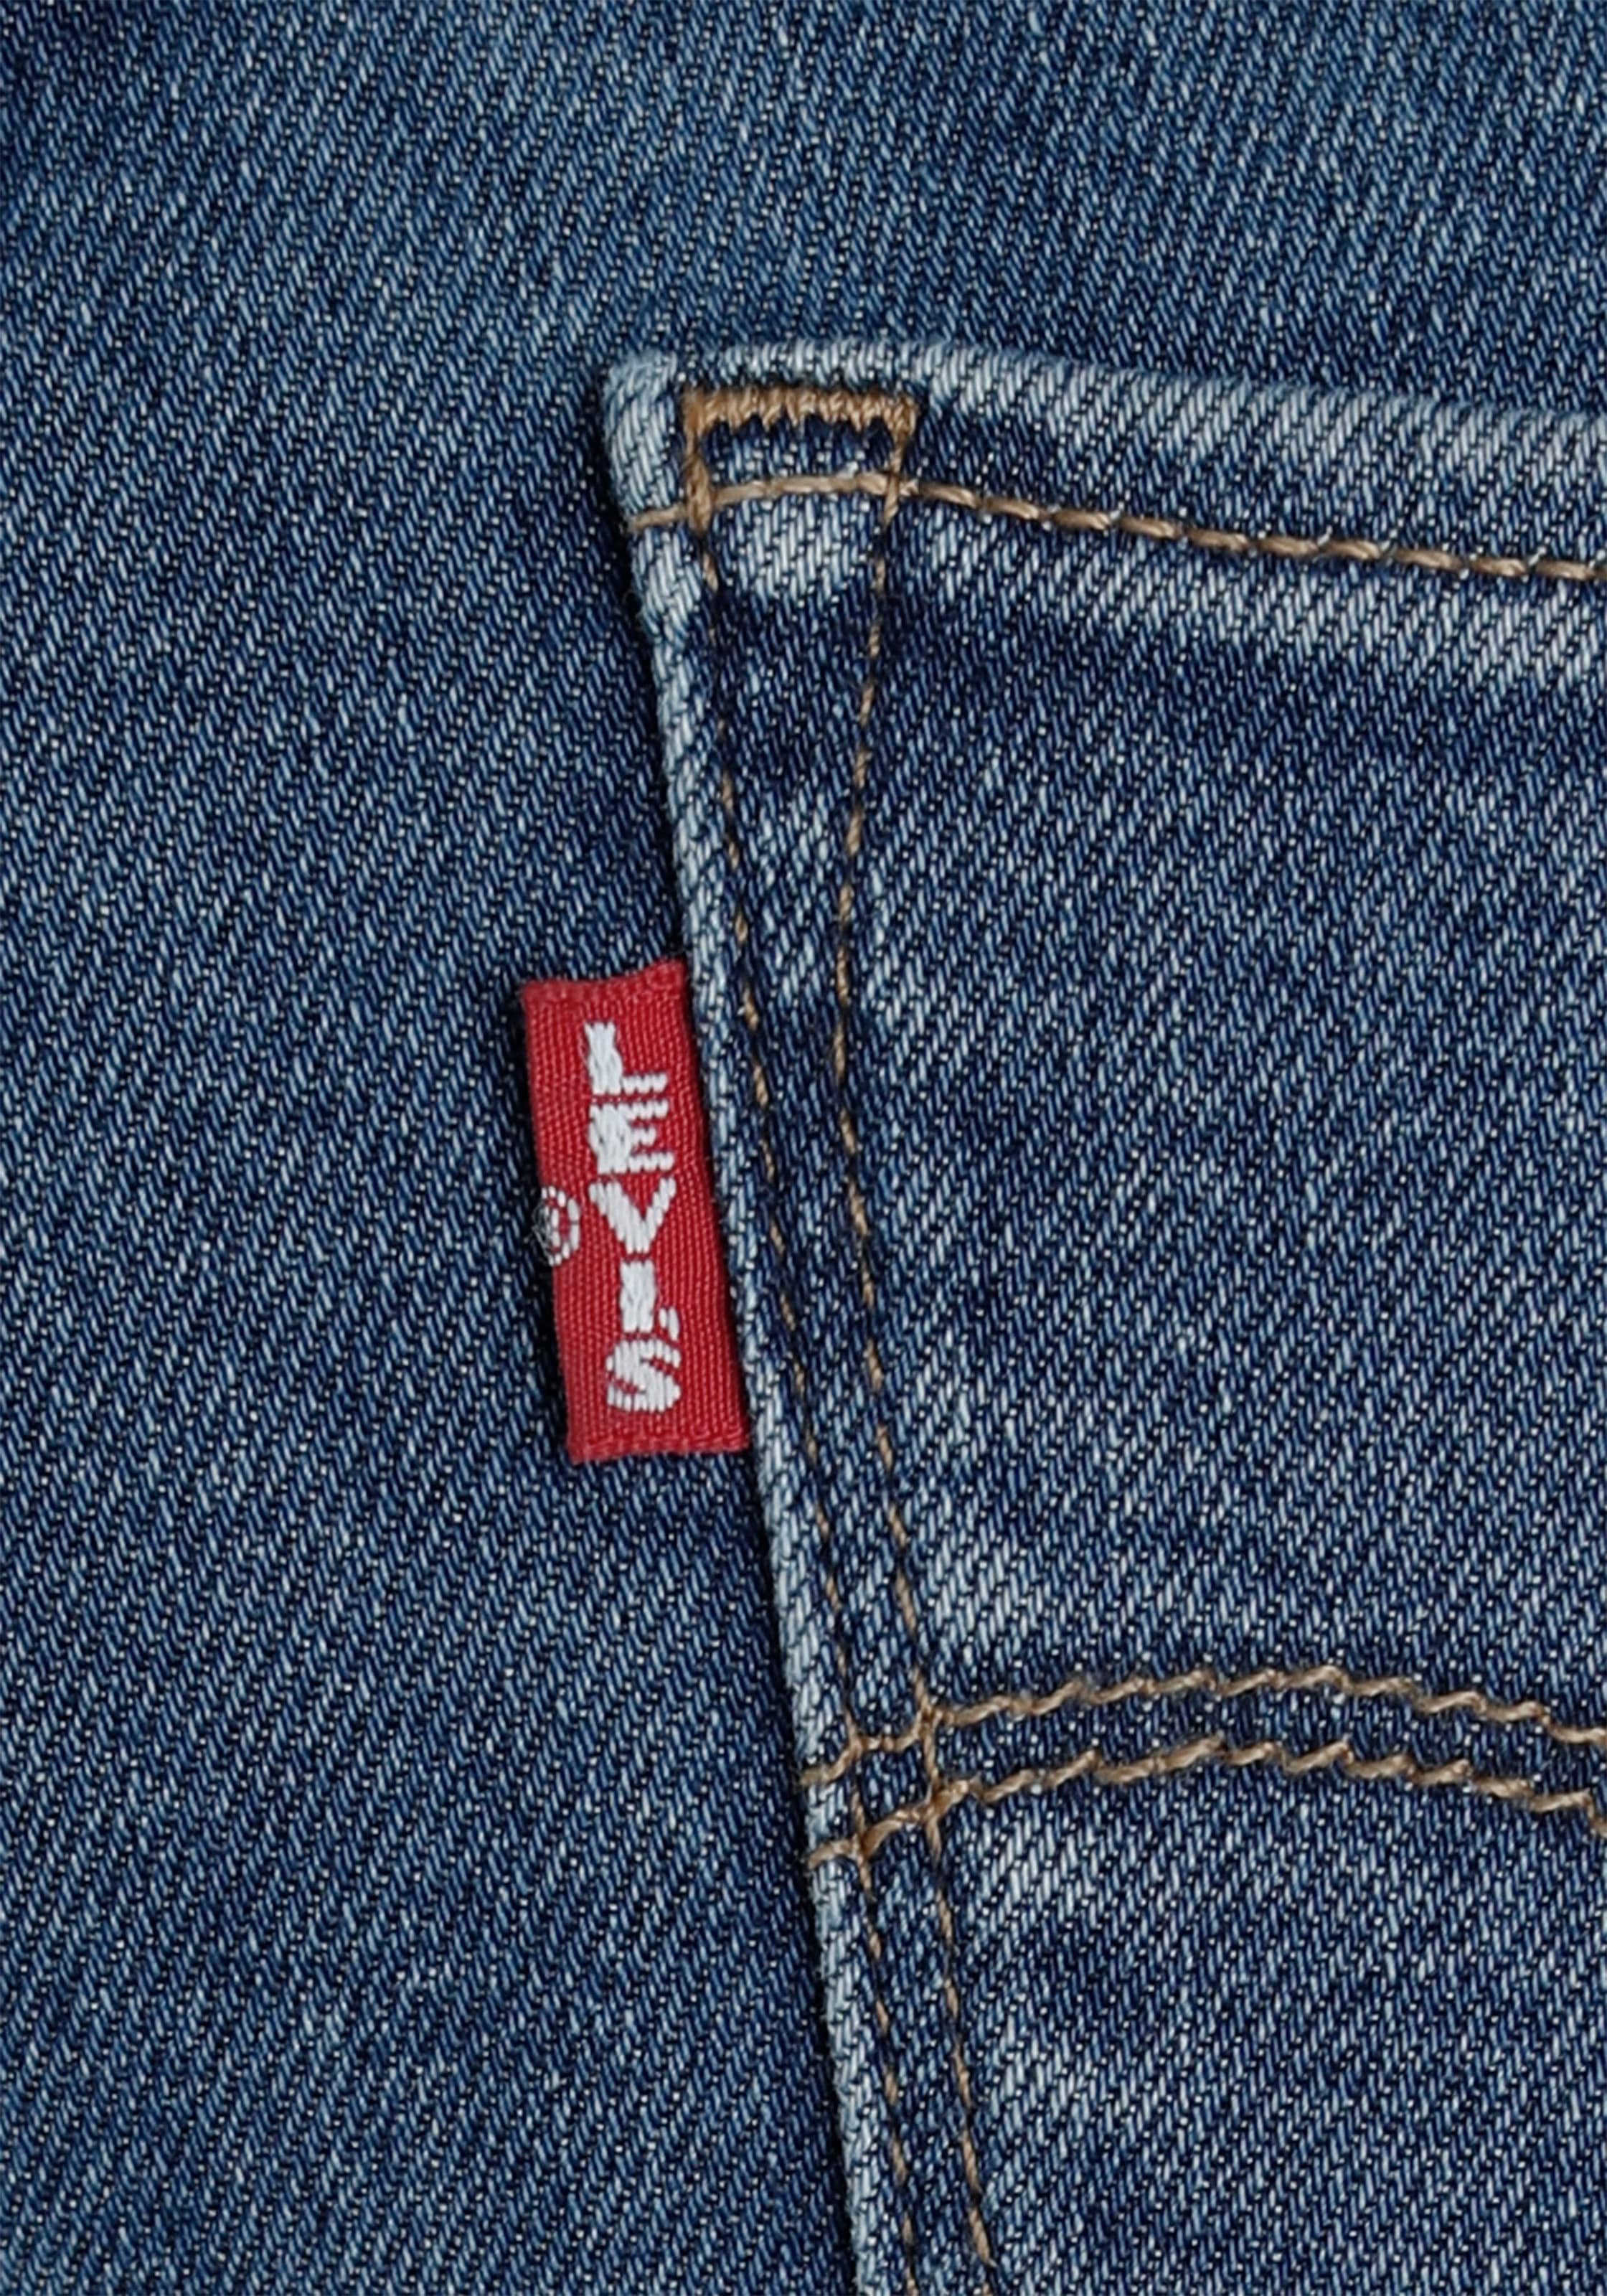 Levi's® Skinny-fit-Jeans »720 High Rise« bei ♕